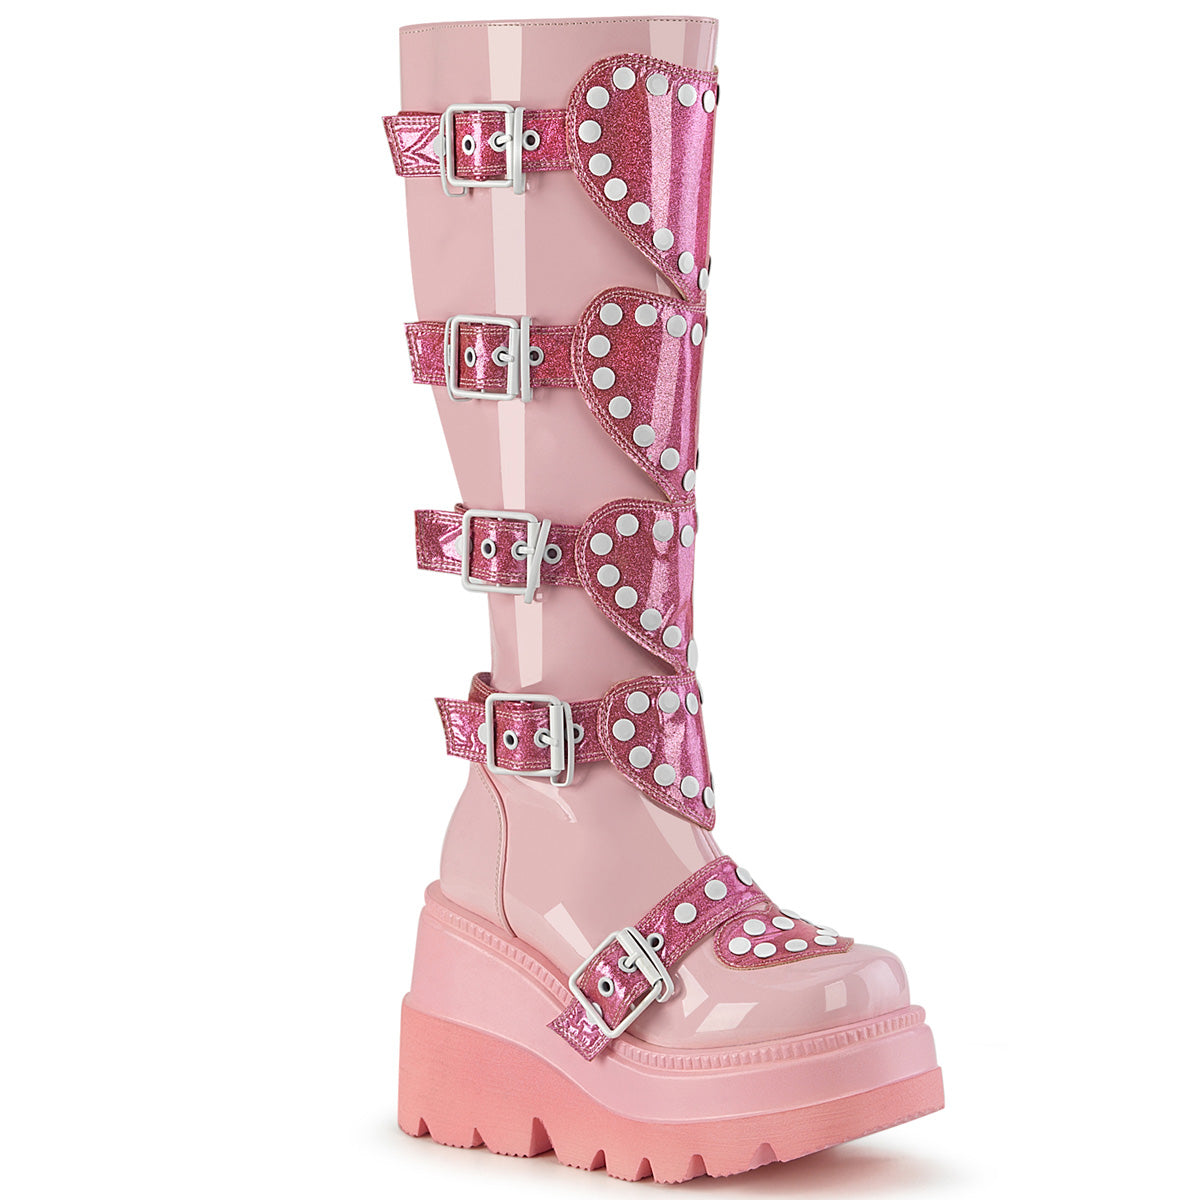 BOOTS WITH WEDGE PLATFORM AND HEART STUDDED DETAIL